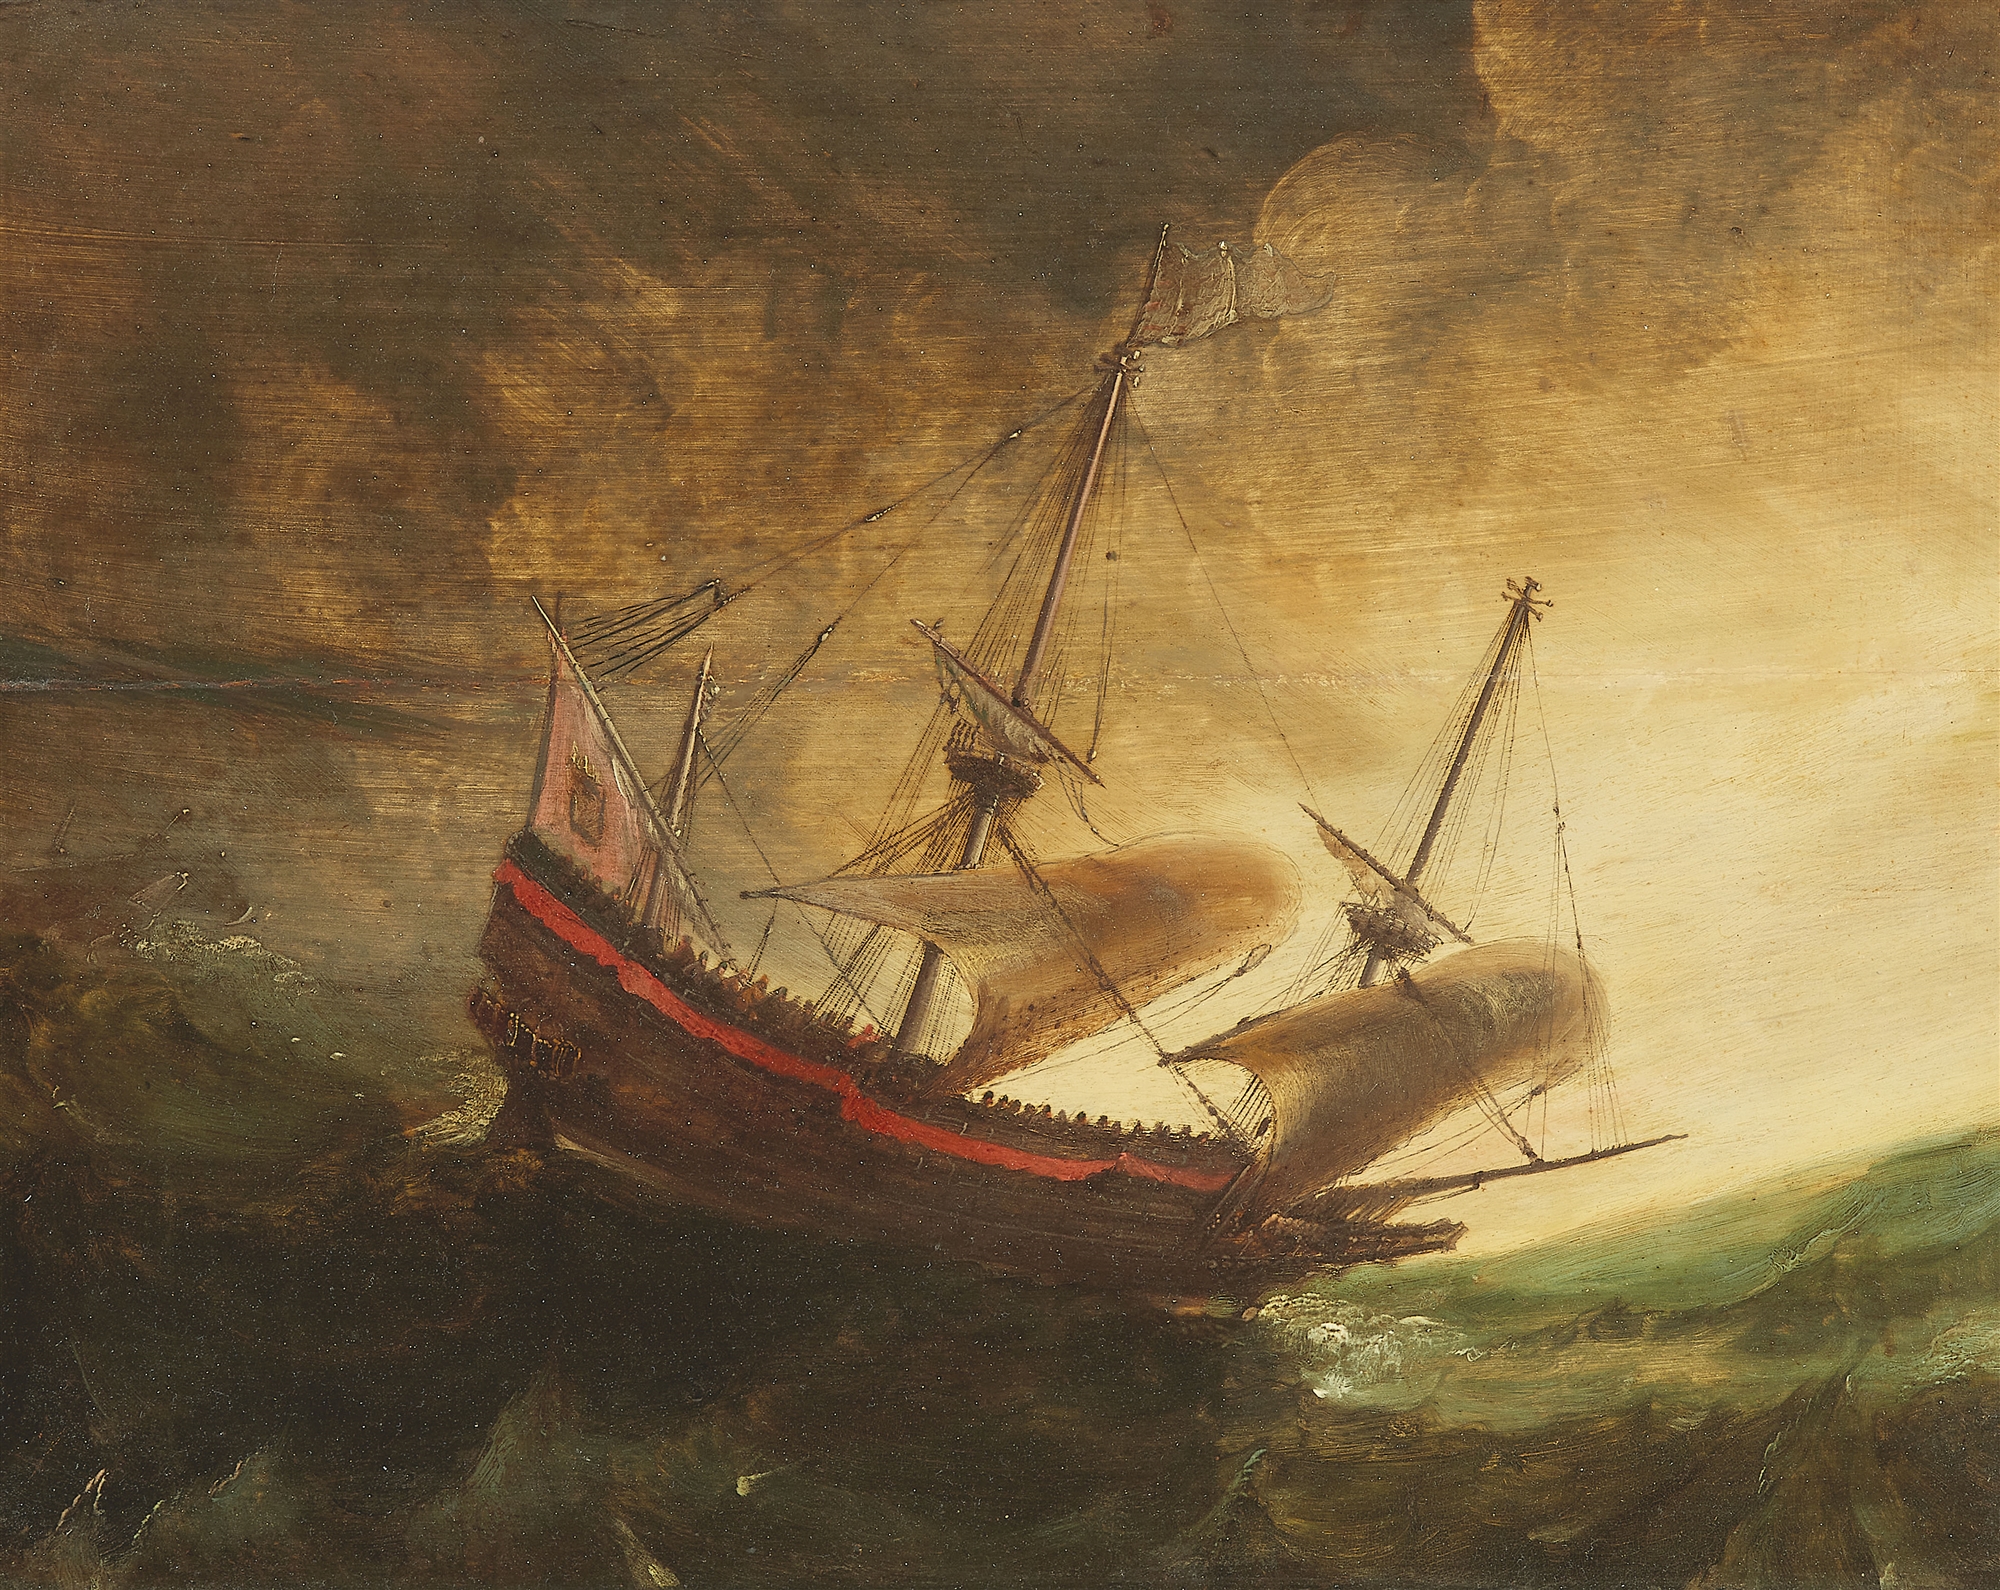 Andries van Eertvelt, attributed to, Sailing Ship on a Stormy Sea